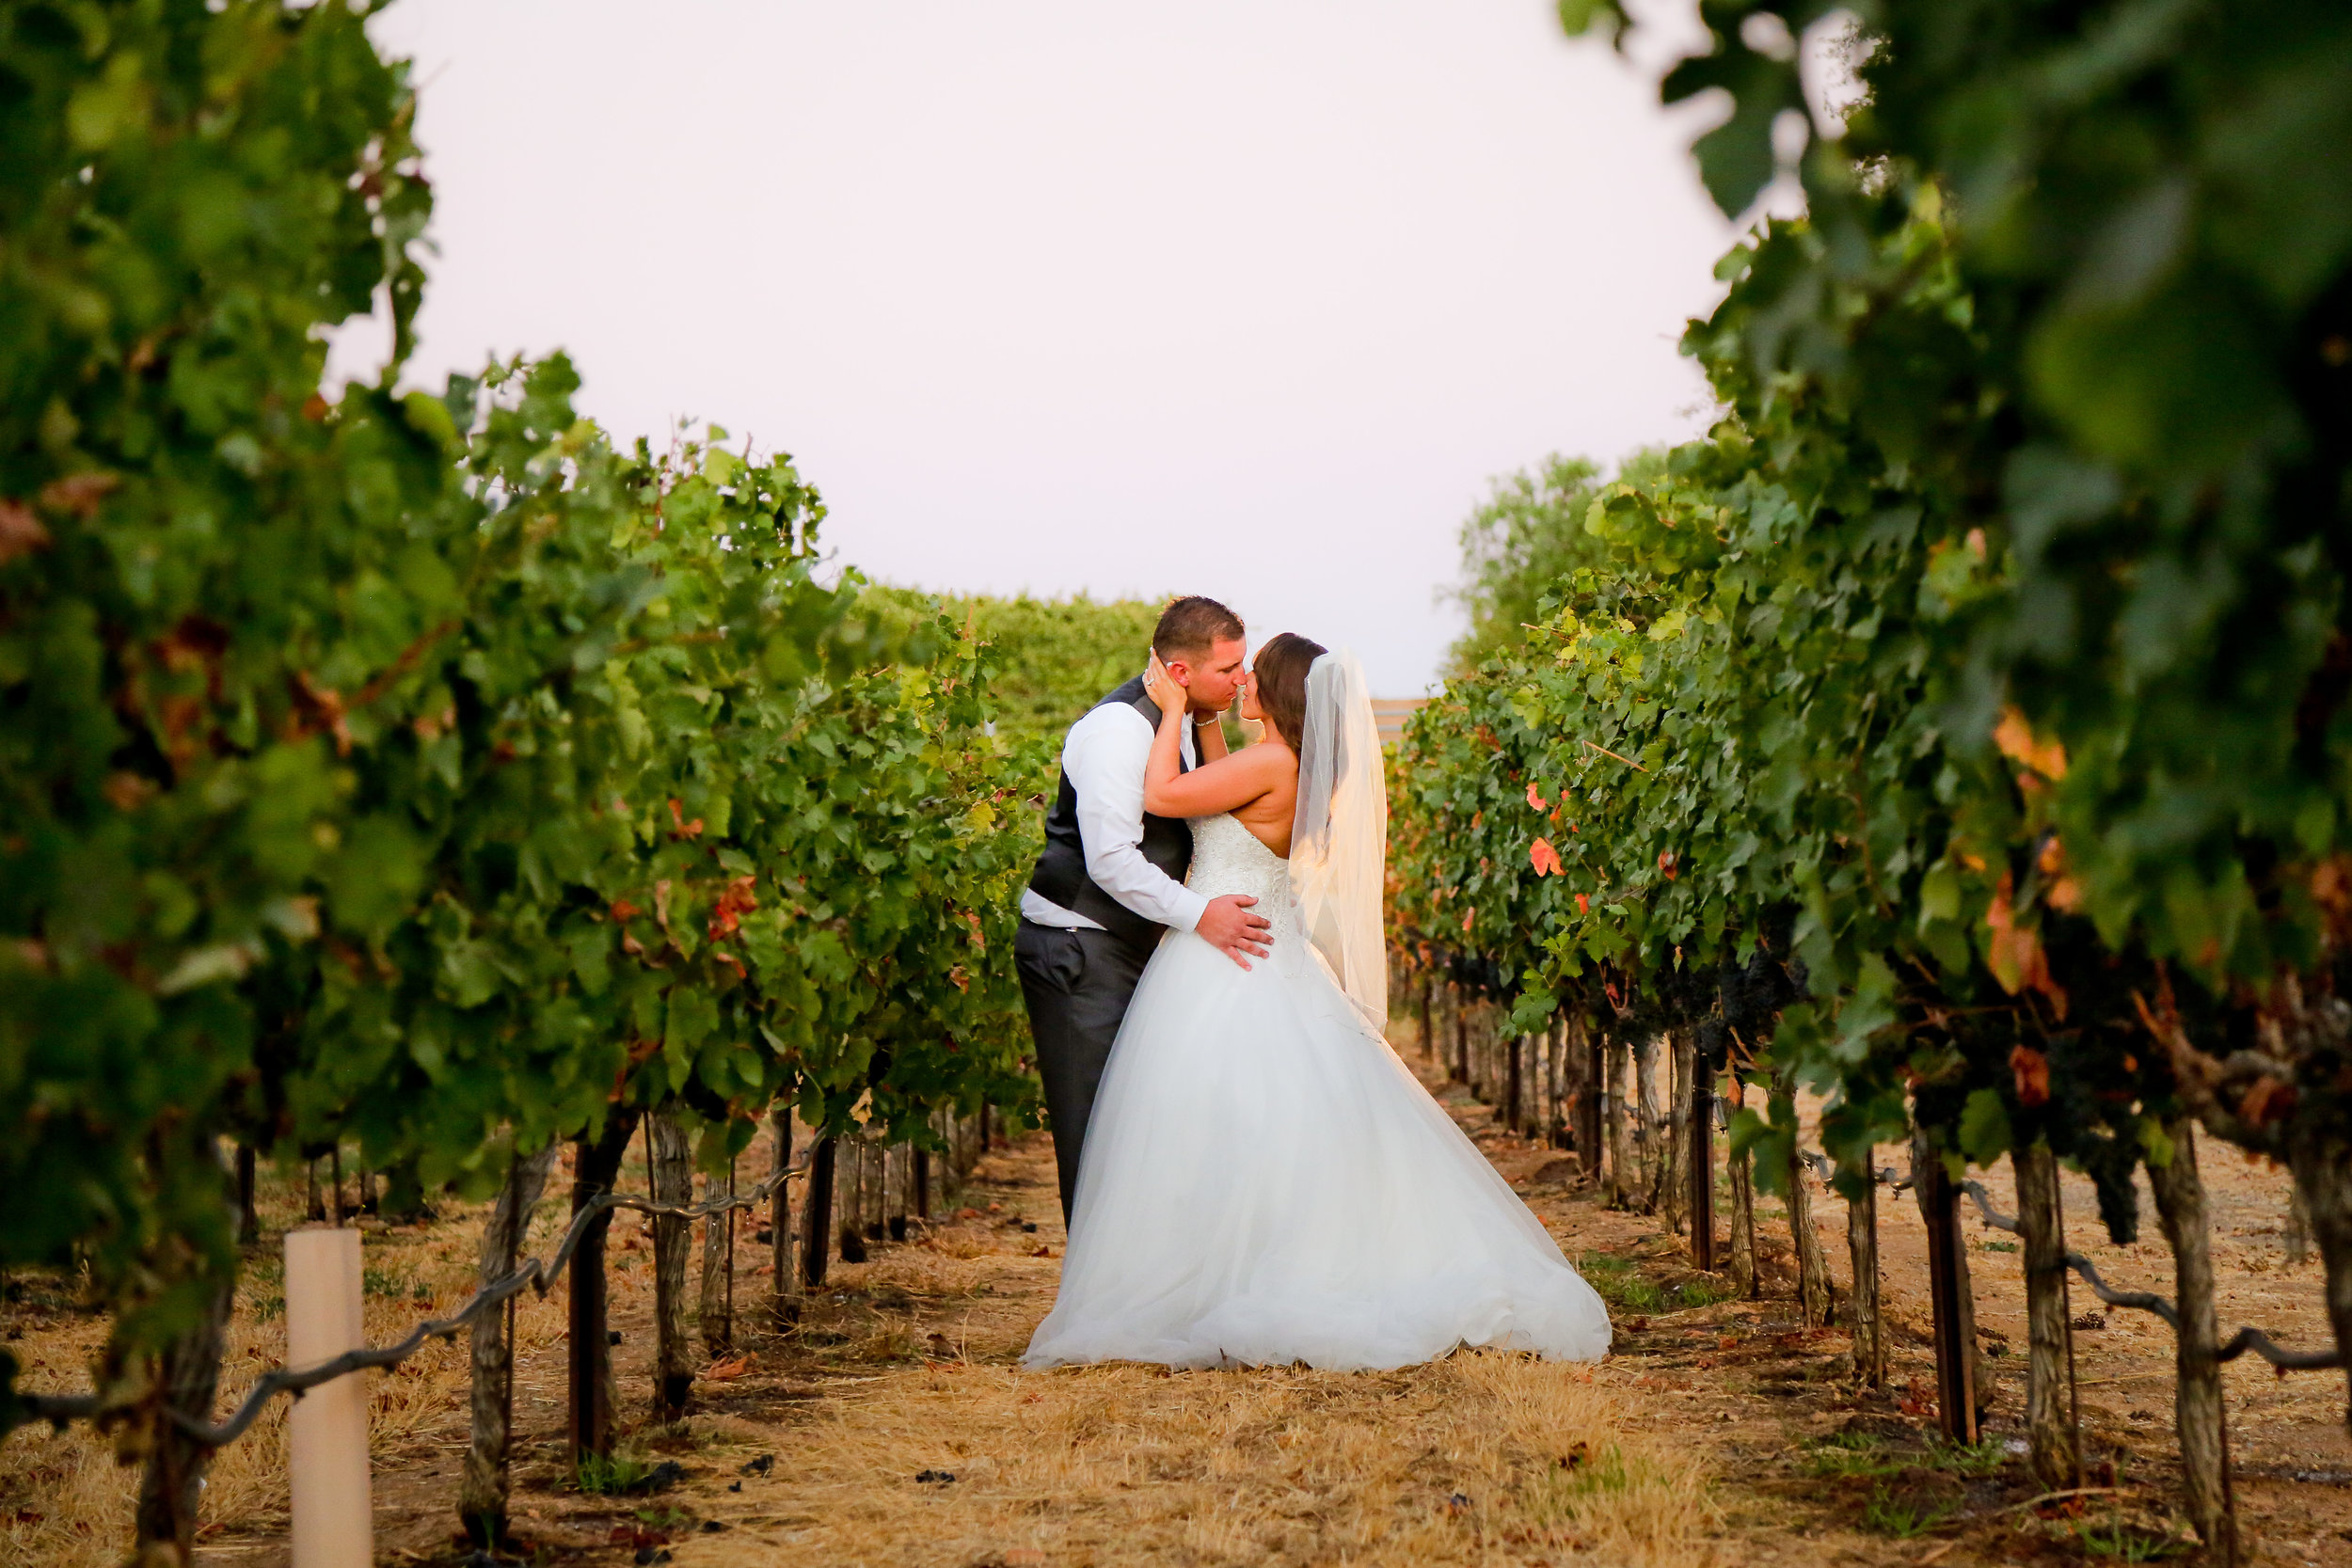 A Las Positas Vineyards Wedding - Stacey & Kelly Chance Discovery Bay Studios